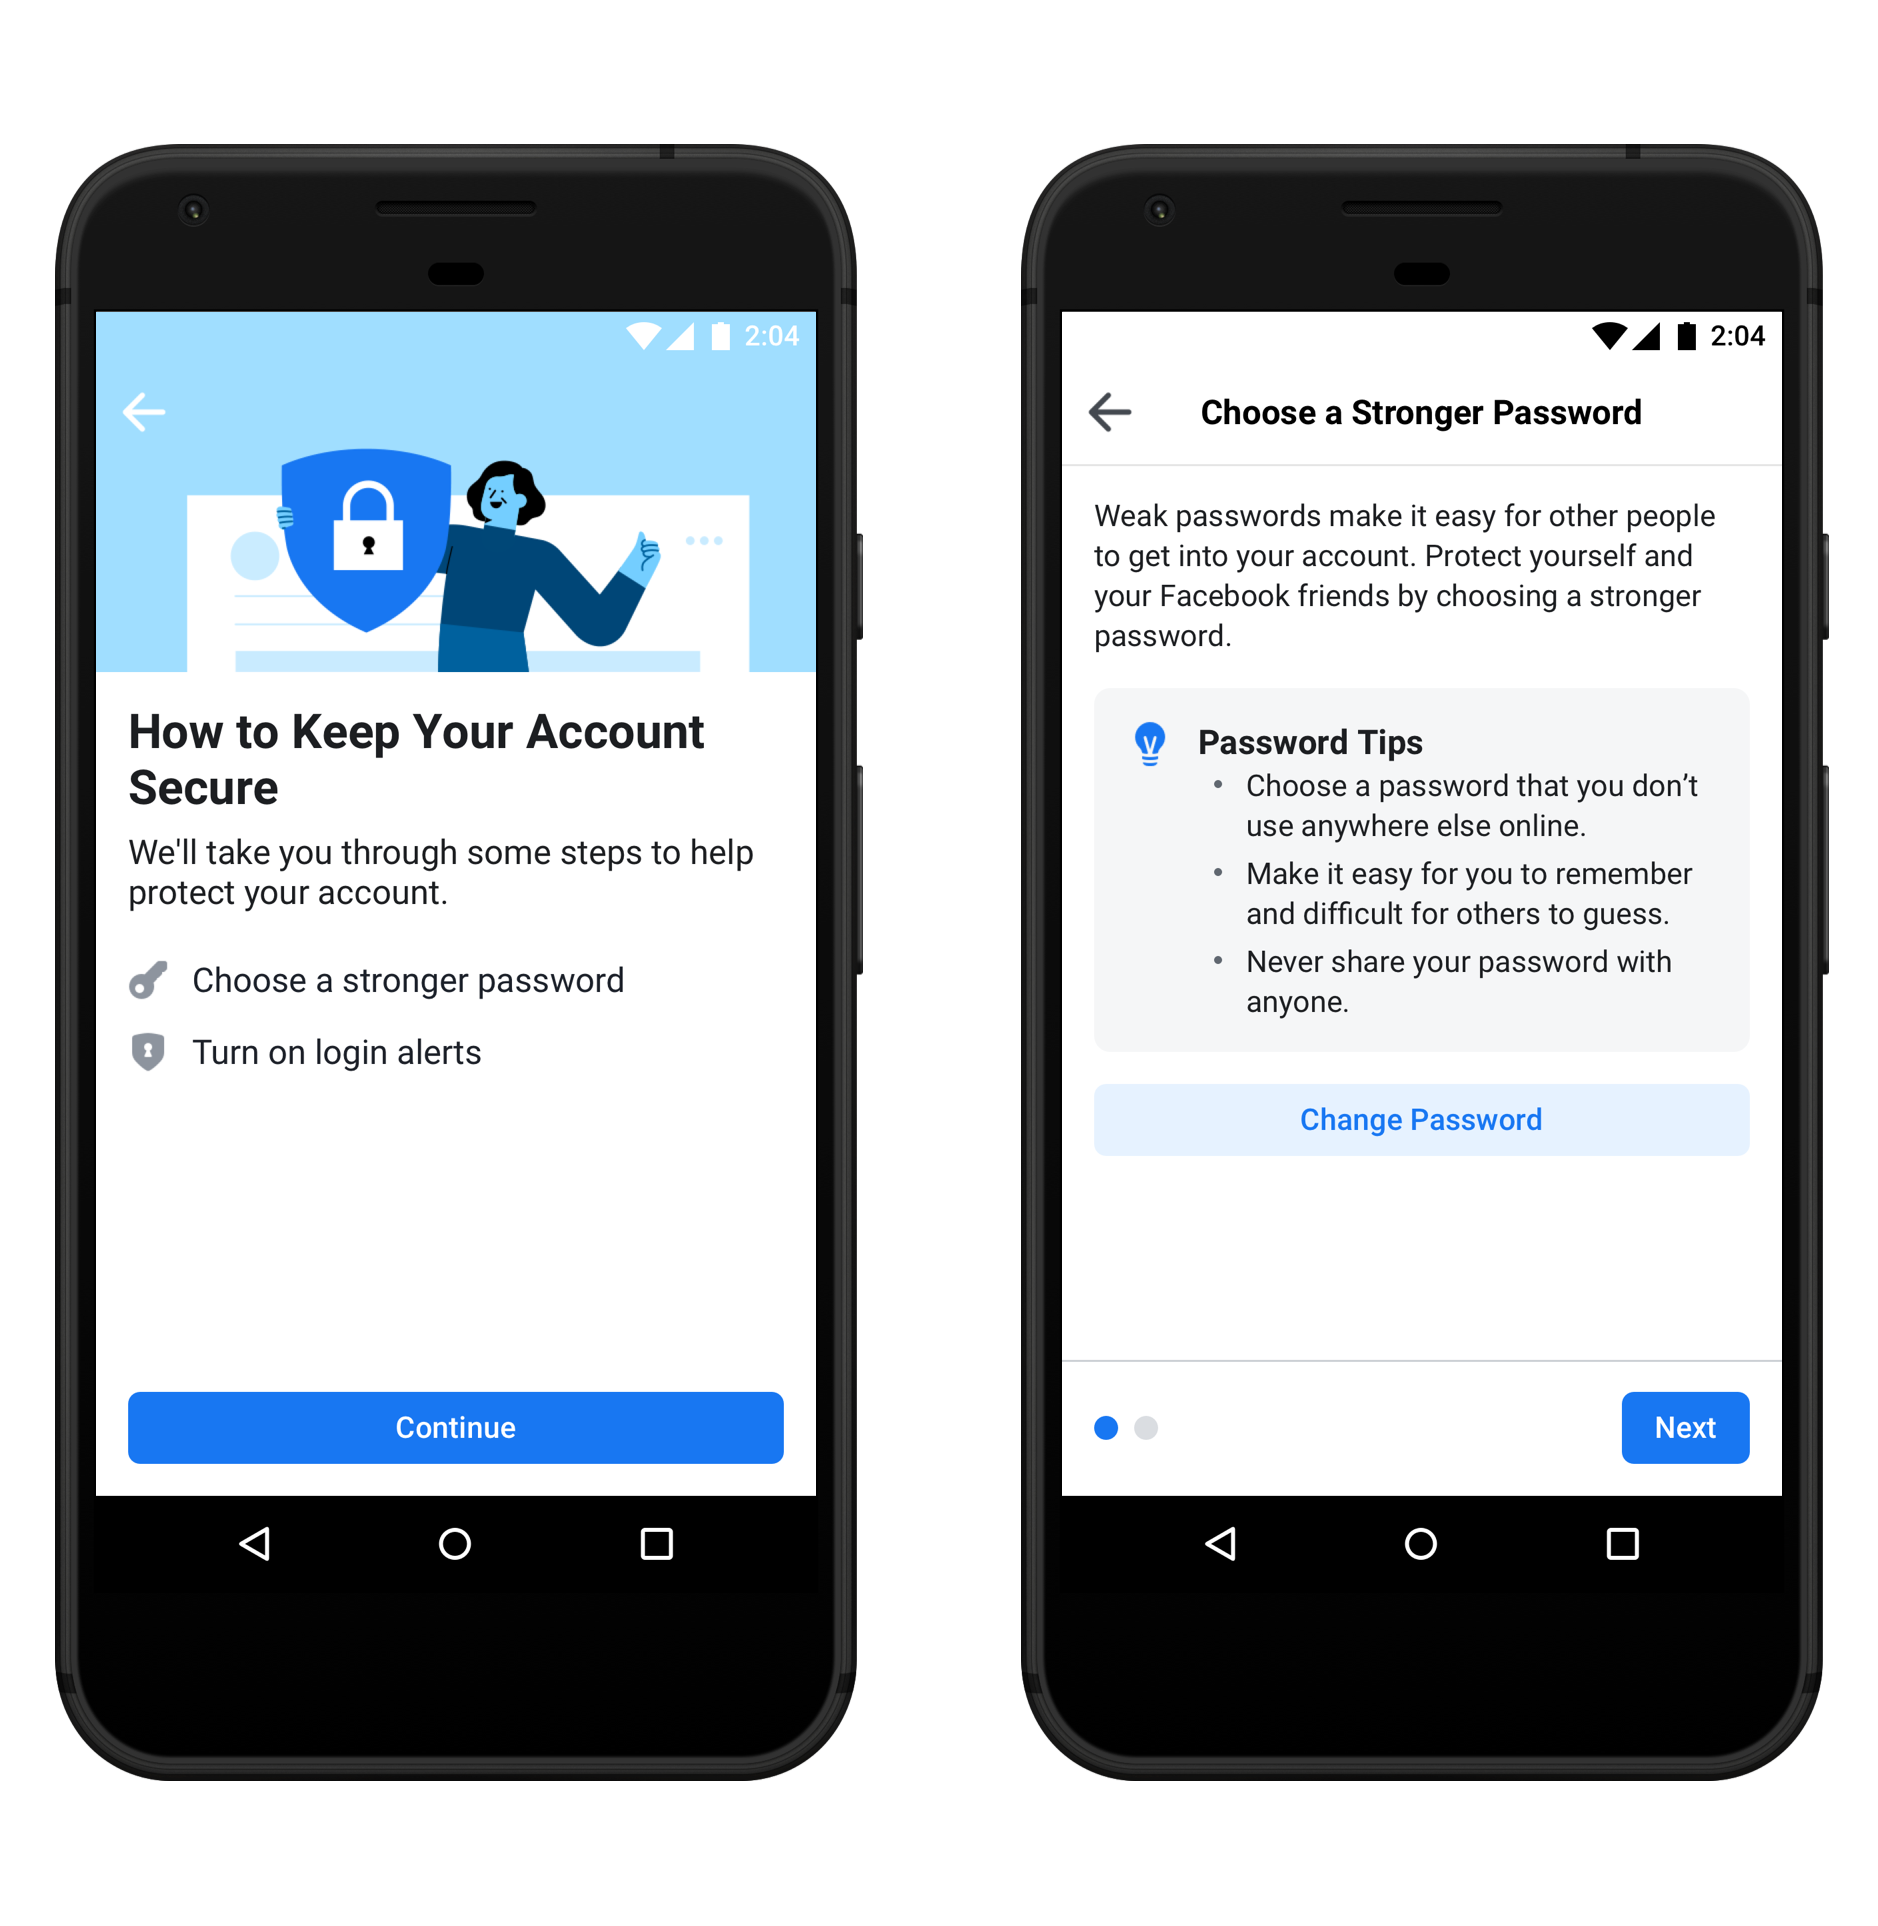 Two Facebook check-ups to stay private, secure